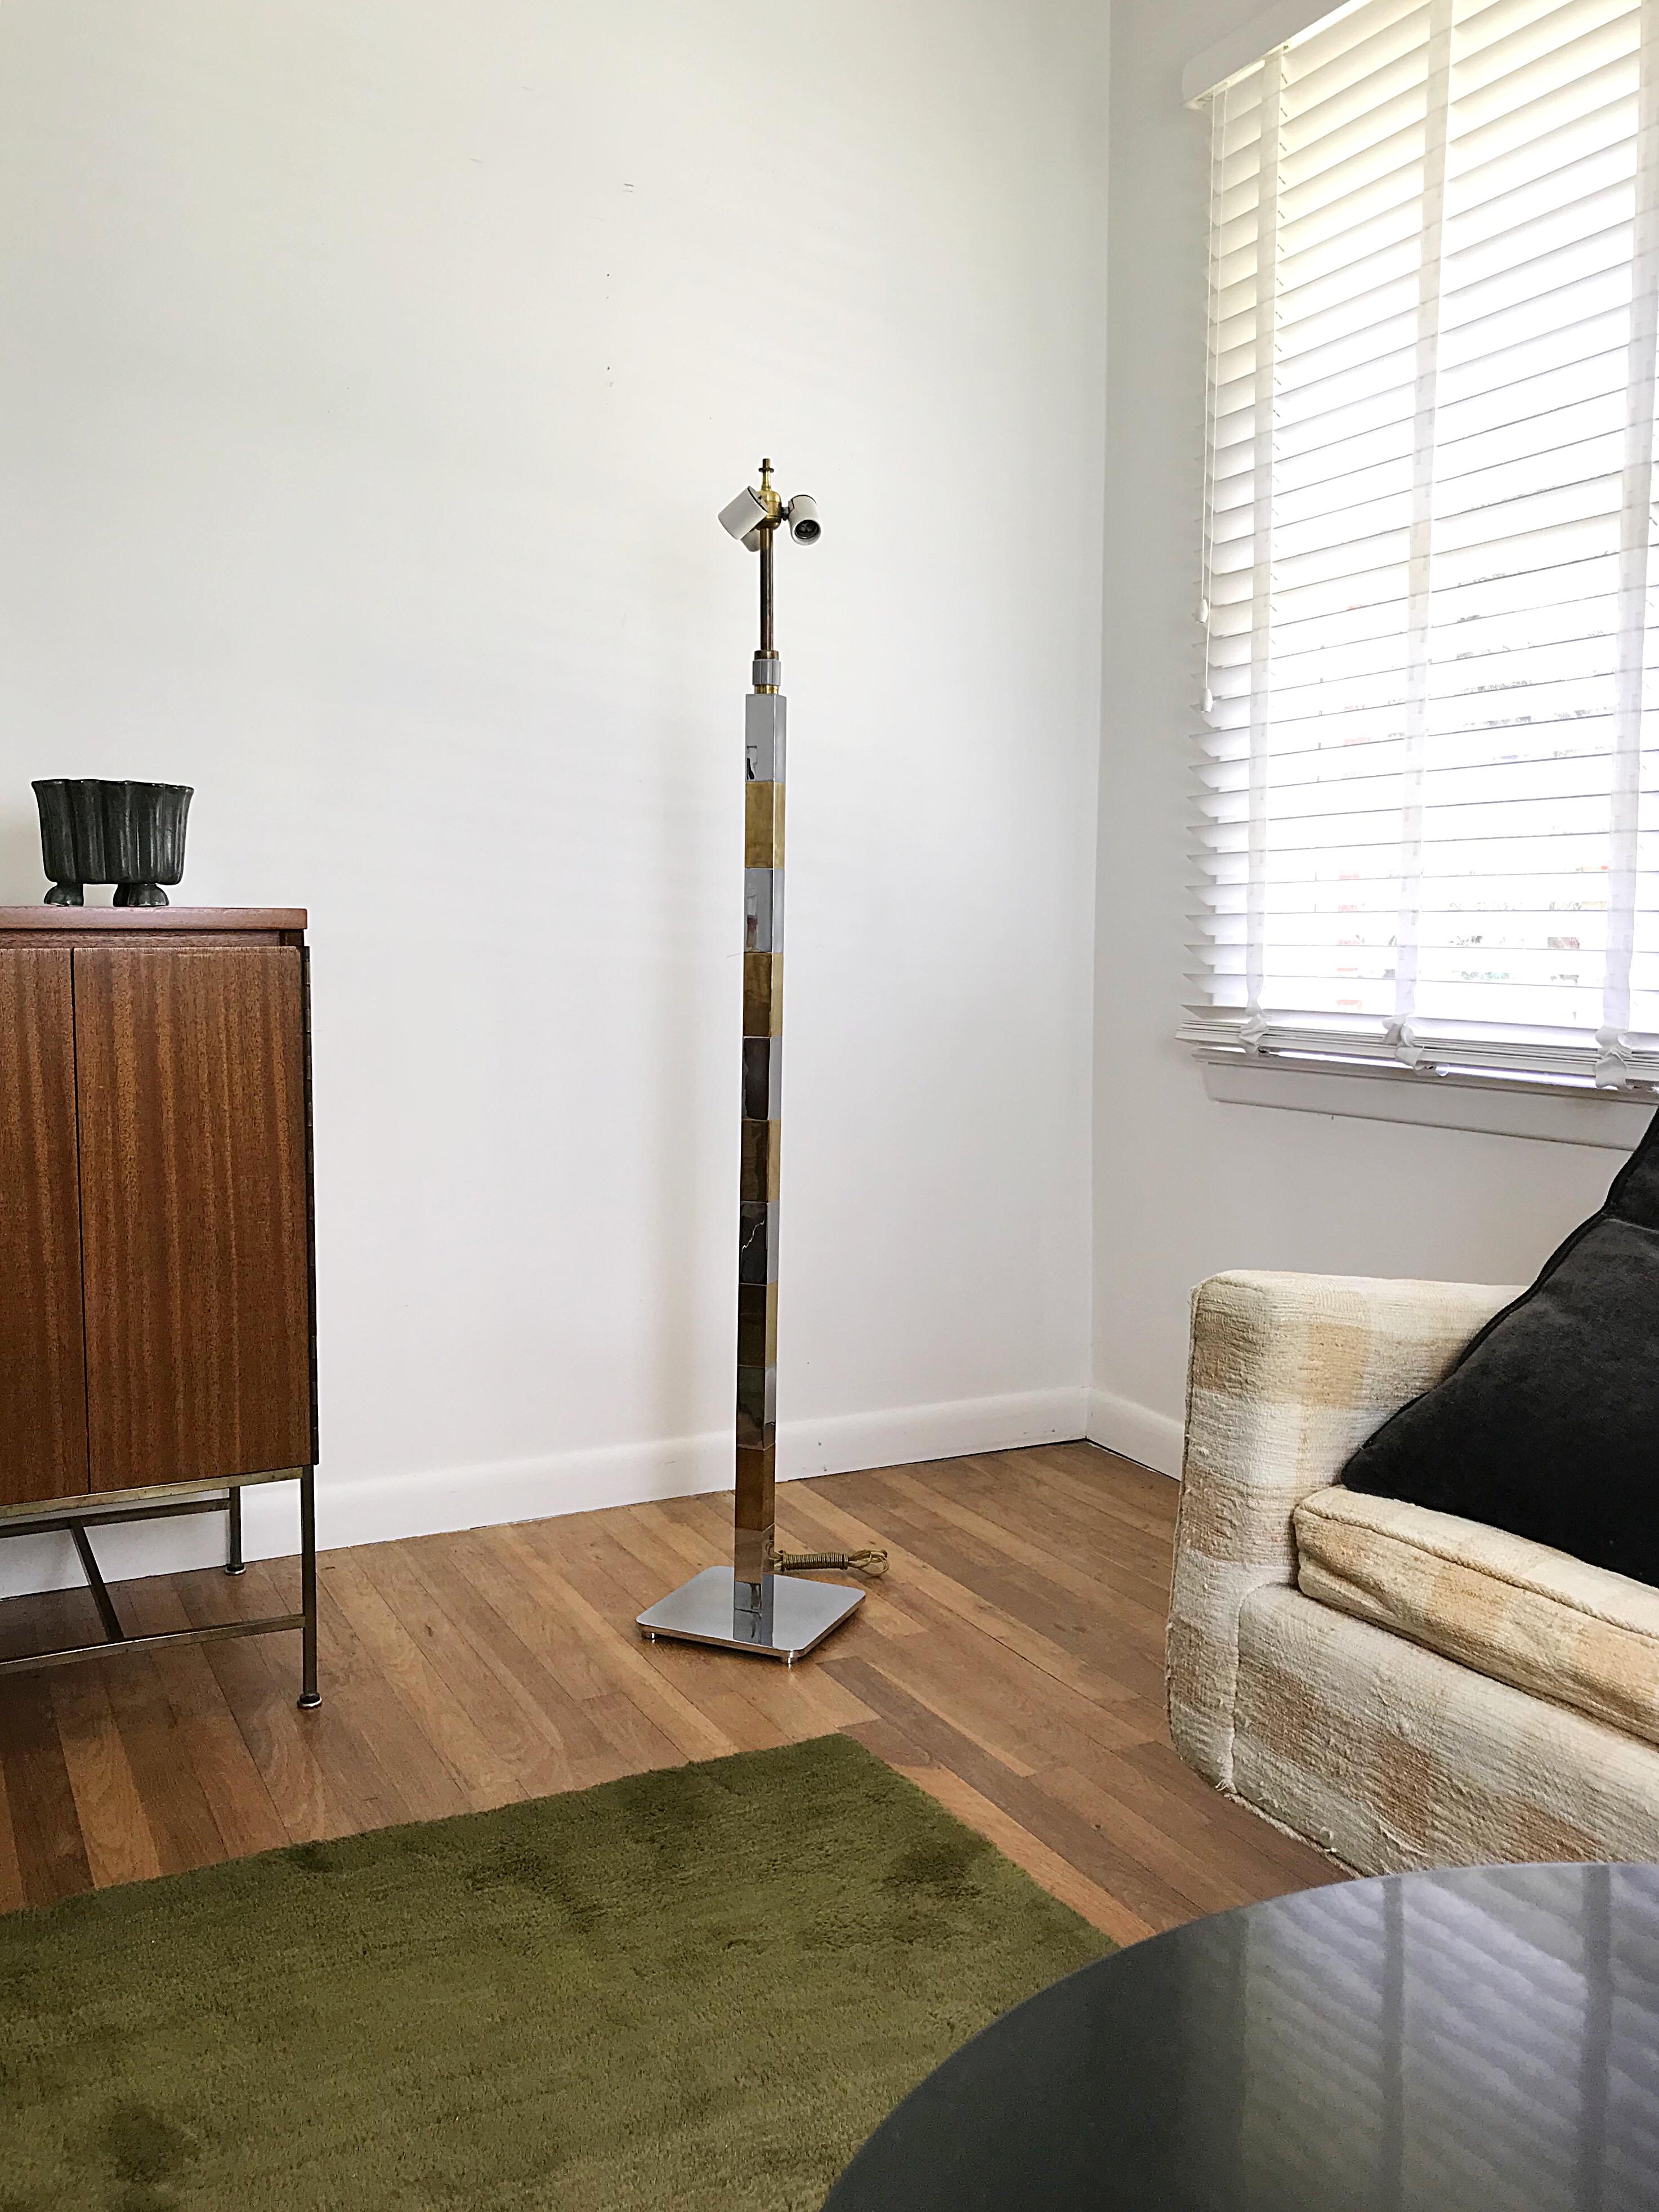 A rare brass and chrome floor lamp designed by Stewart Ross James for Hansen Lamps / New York. The floor lamp is all original and has the rare three way collar switch which is no longer produced. The lamp stands on four adjustable feet for leveling